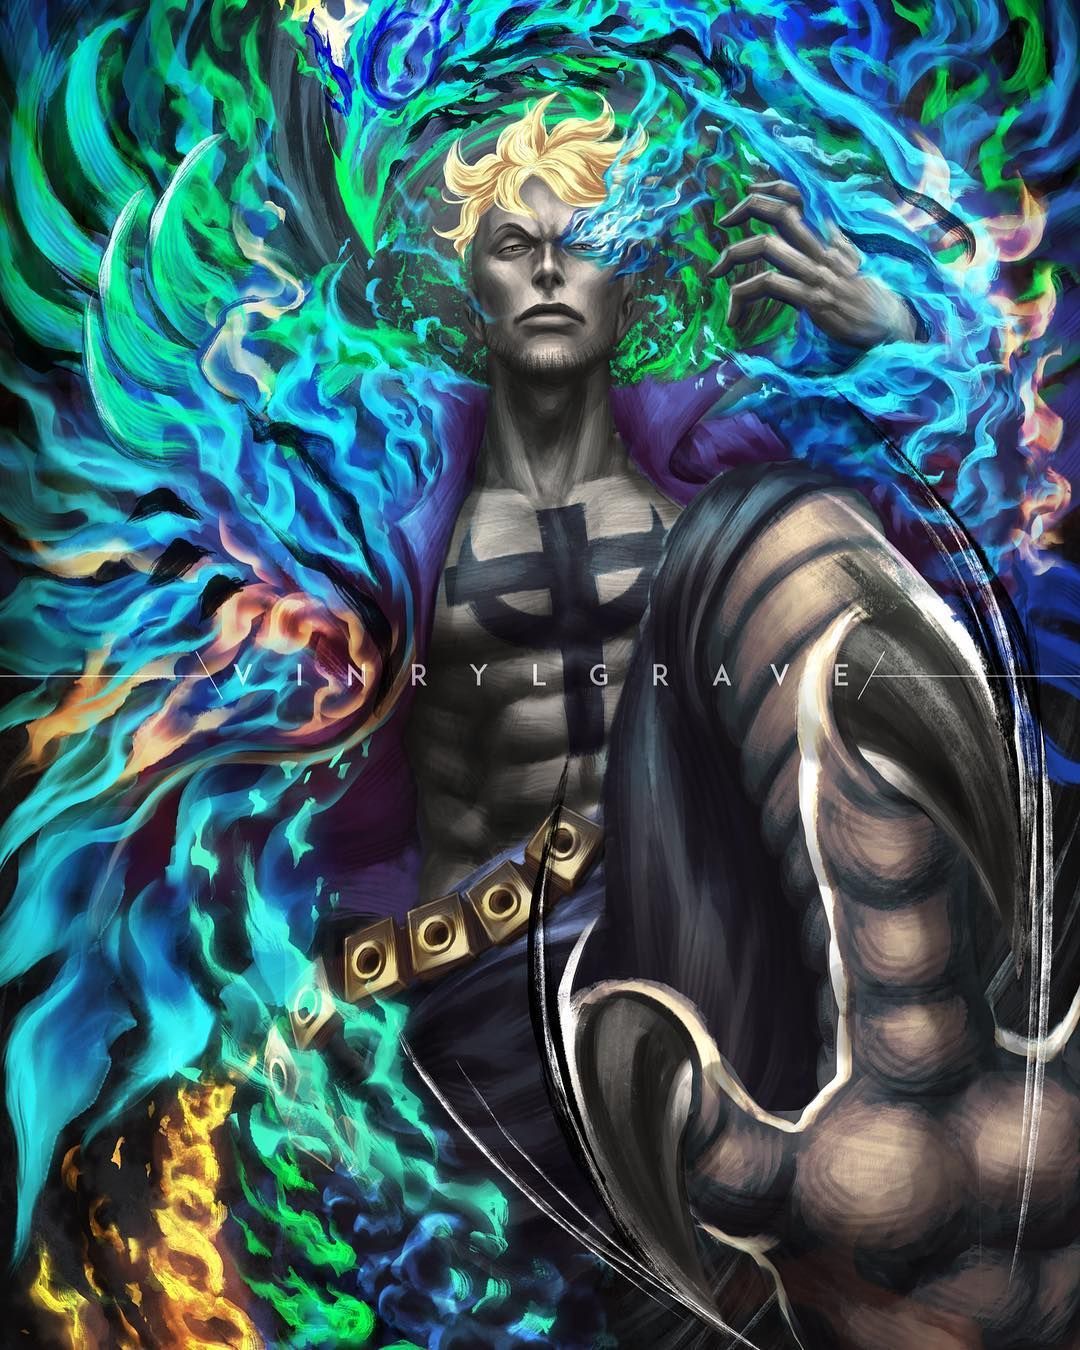 Marco, The Phoenix 1st Division Commander of Whitebeard pirates